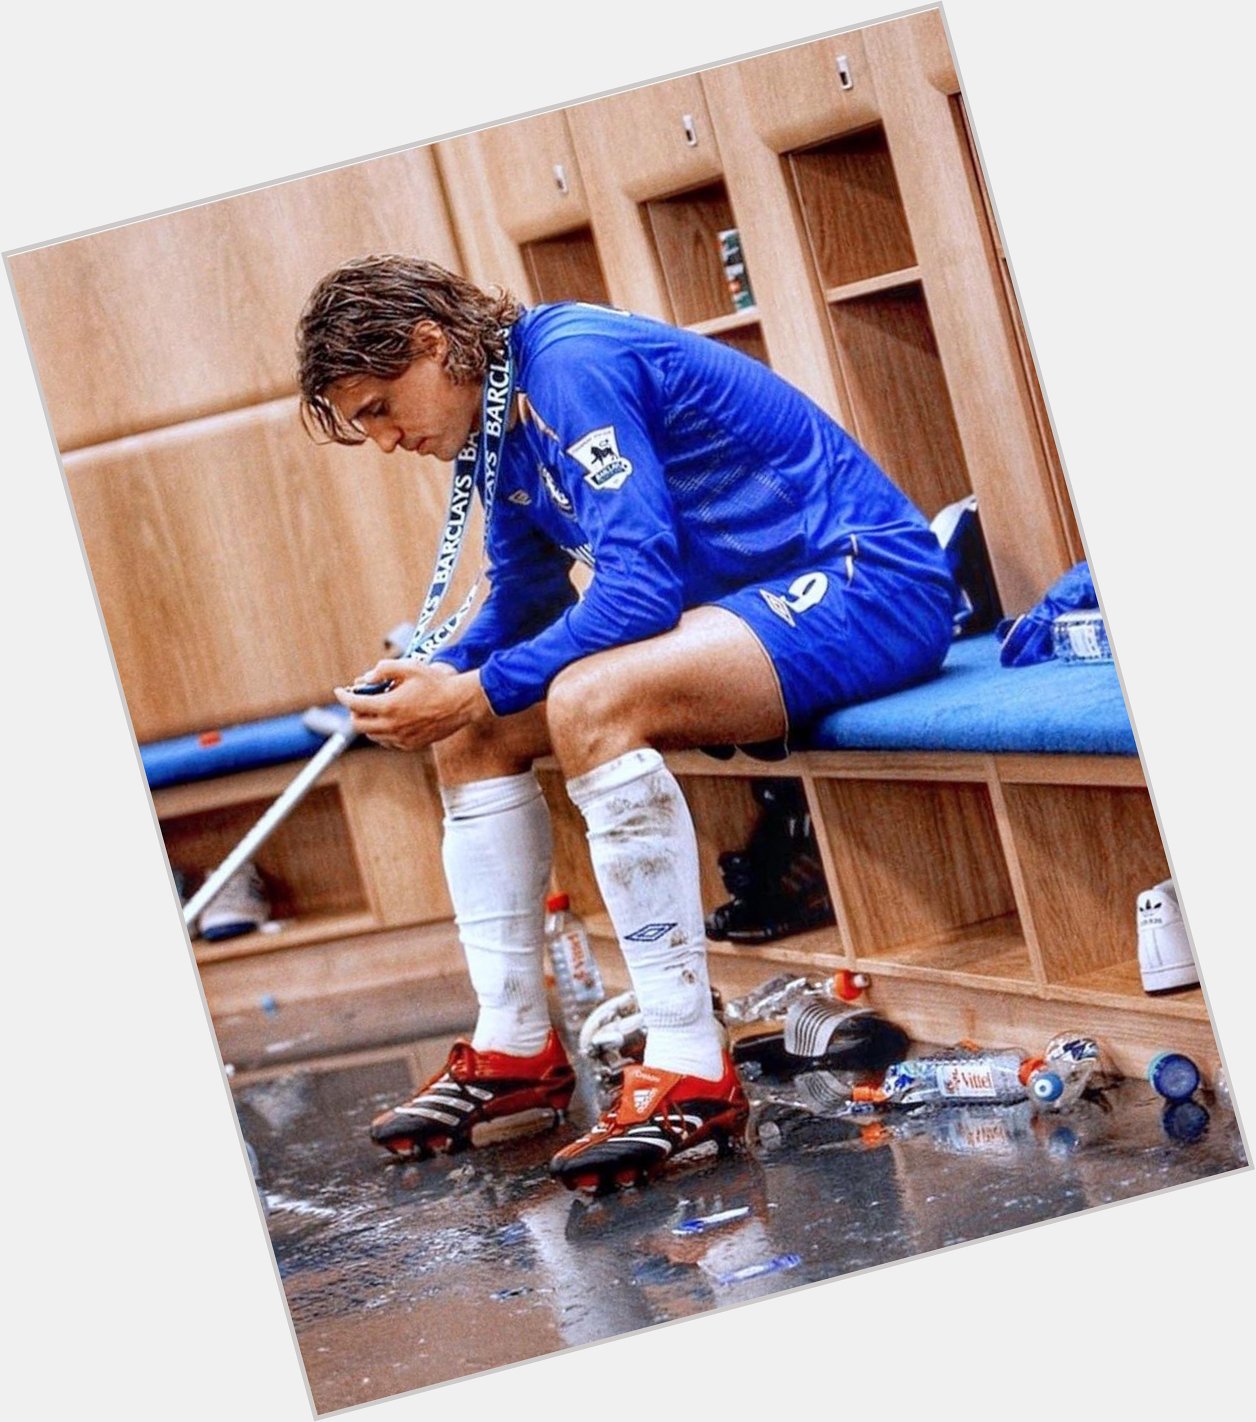 Happy Birthday to Hernan Crespo.

Will never forget this iconic photo. 